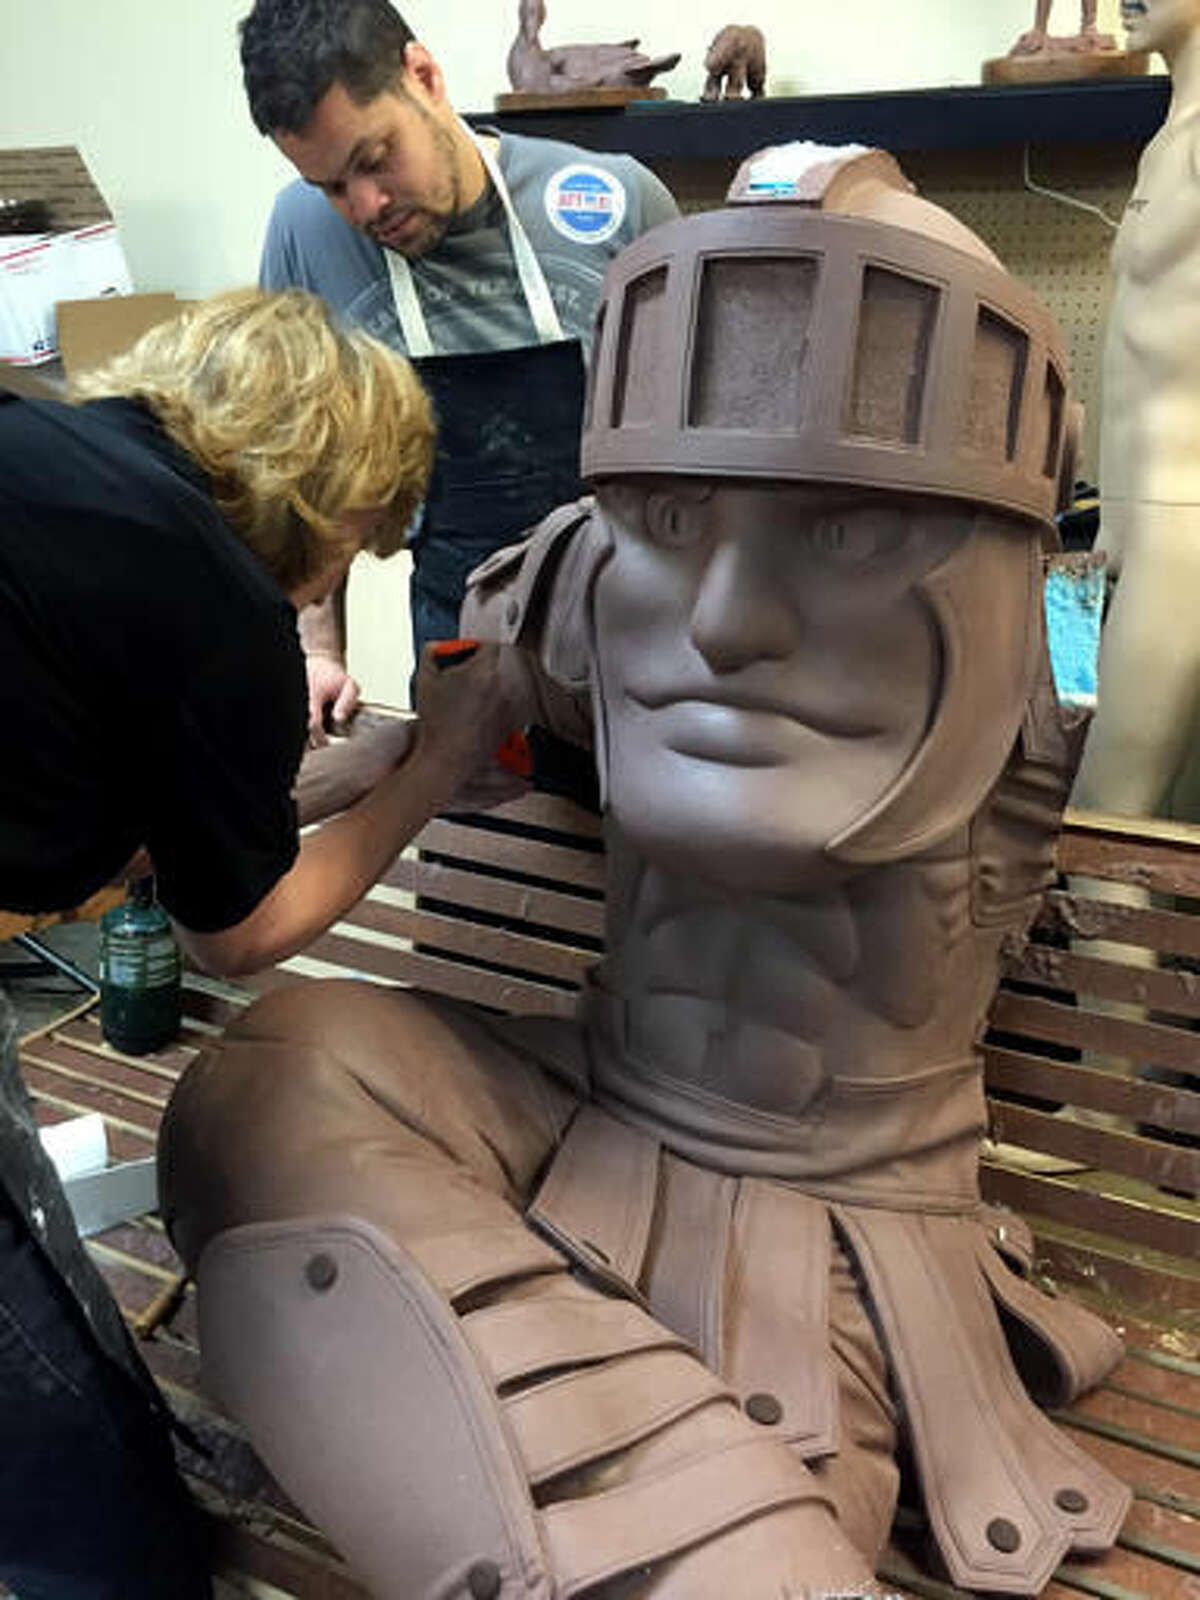 This Aug. 1, 2016, photo provided by Dugan Strategic Marketing shows construction of a clay rendering of a new bronze statue monument to Michigan State University's Sparty mascot, at the sculptor’s studio in Troutdale, Ore. A clay rendering will be used to cast the statue. Those involved in the project say an Oct. 12 unveiling is scheduled at the MSU Union in East Lansing, Mich. (Alison Brown/Dugan Strategic Marketing via AP)